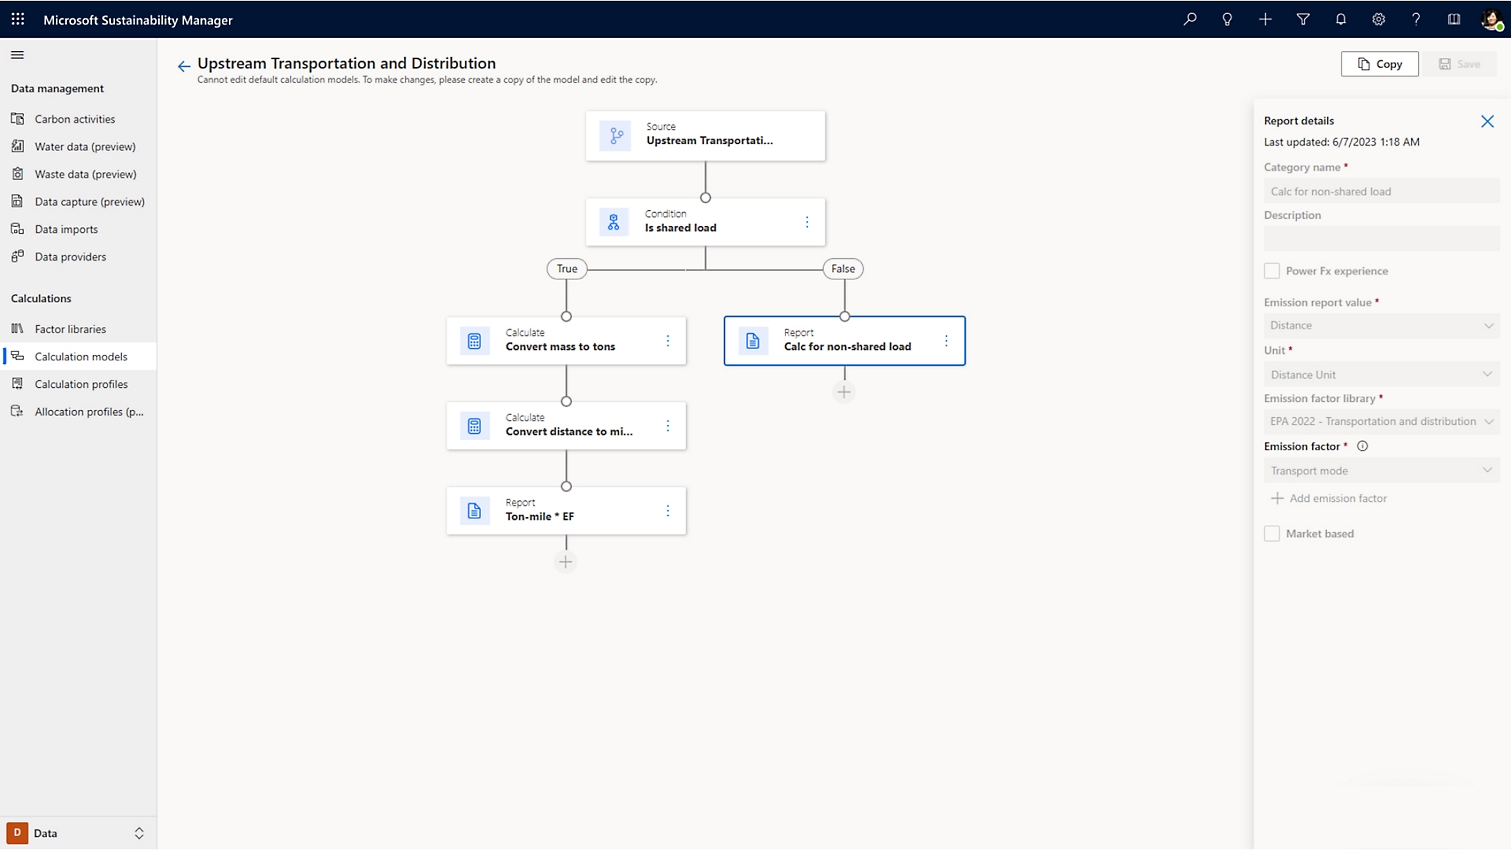 A user editing Upstream Transportation and Distribution flowchart in Microsoft Sustainability Manager 